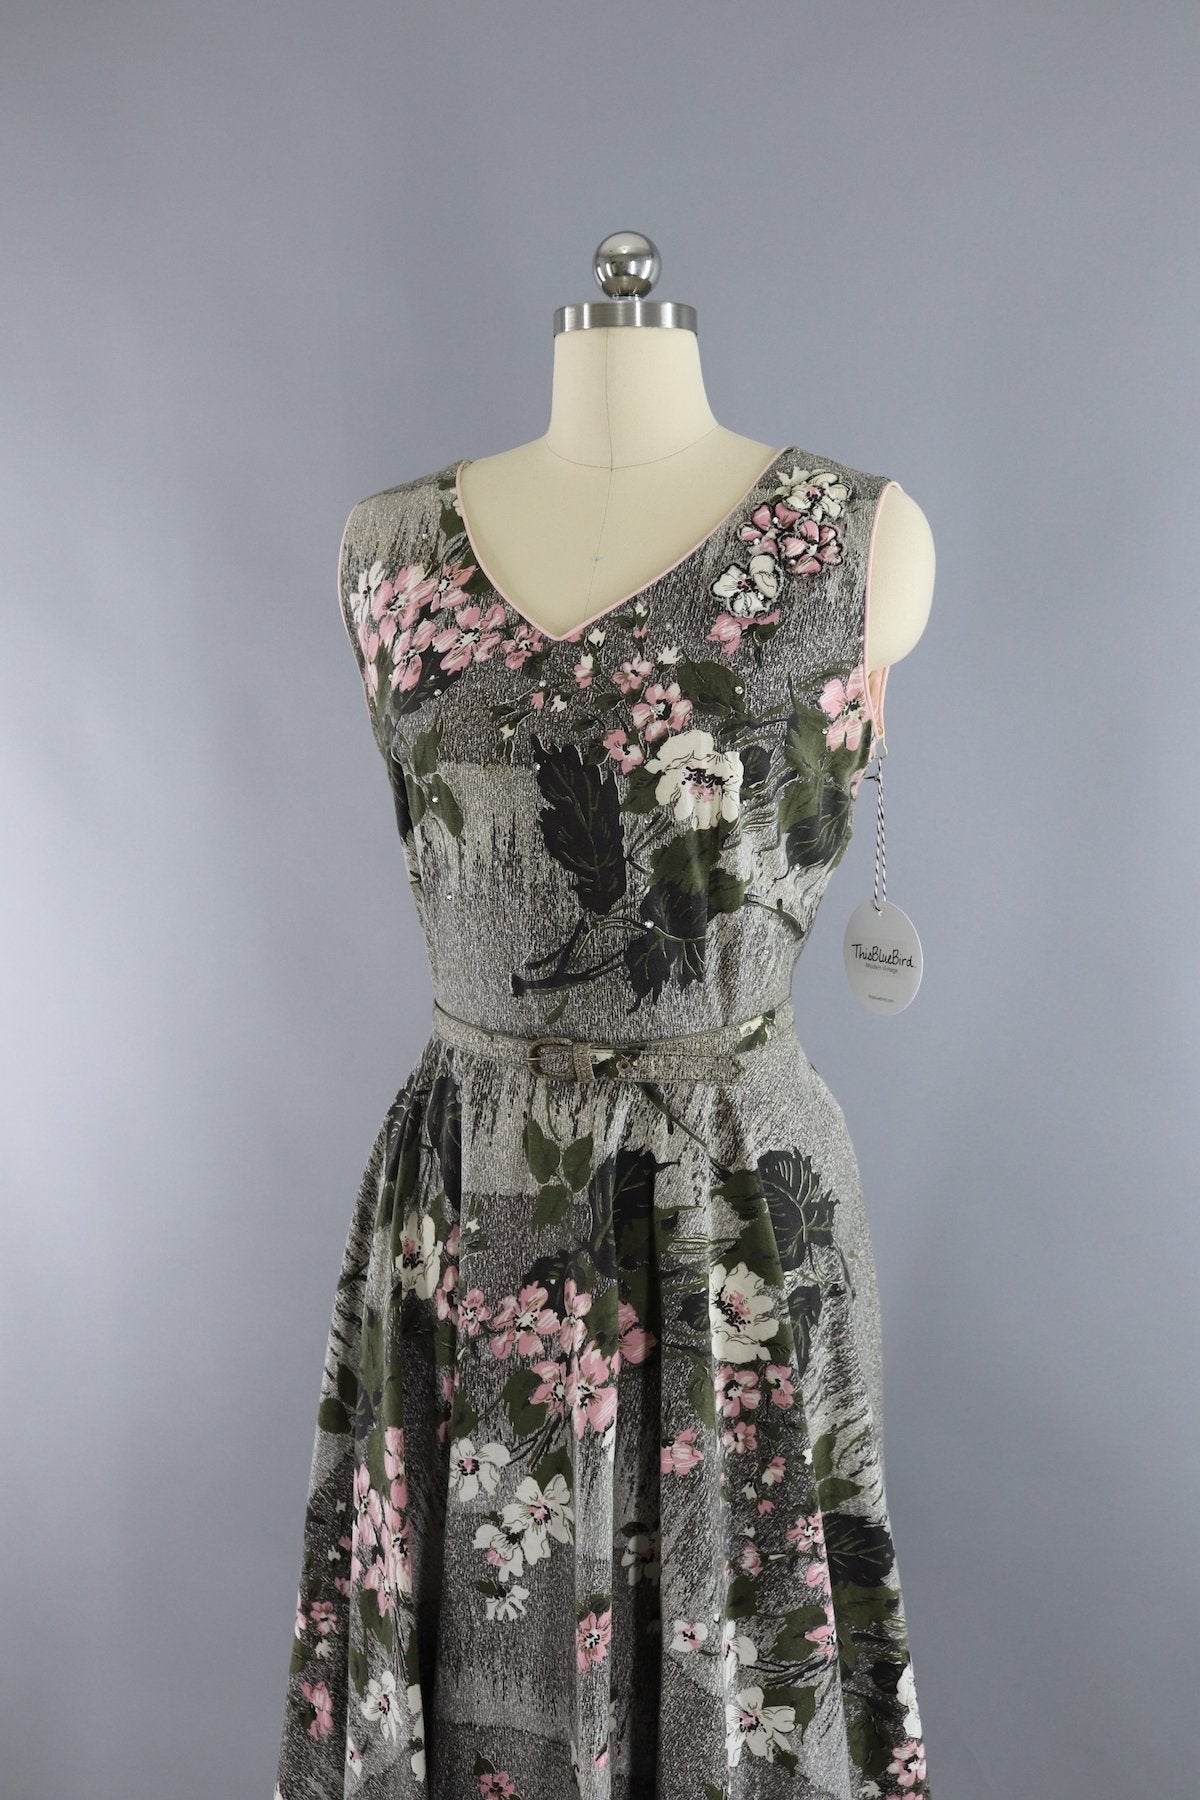 Vintage 1950s Cotton Sundress Olive Green & Pink Floral Print - ThisBlueBird